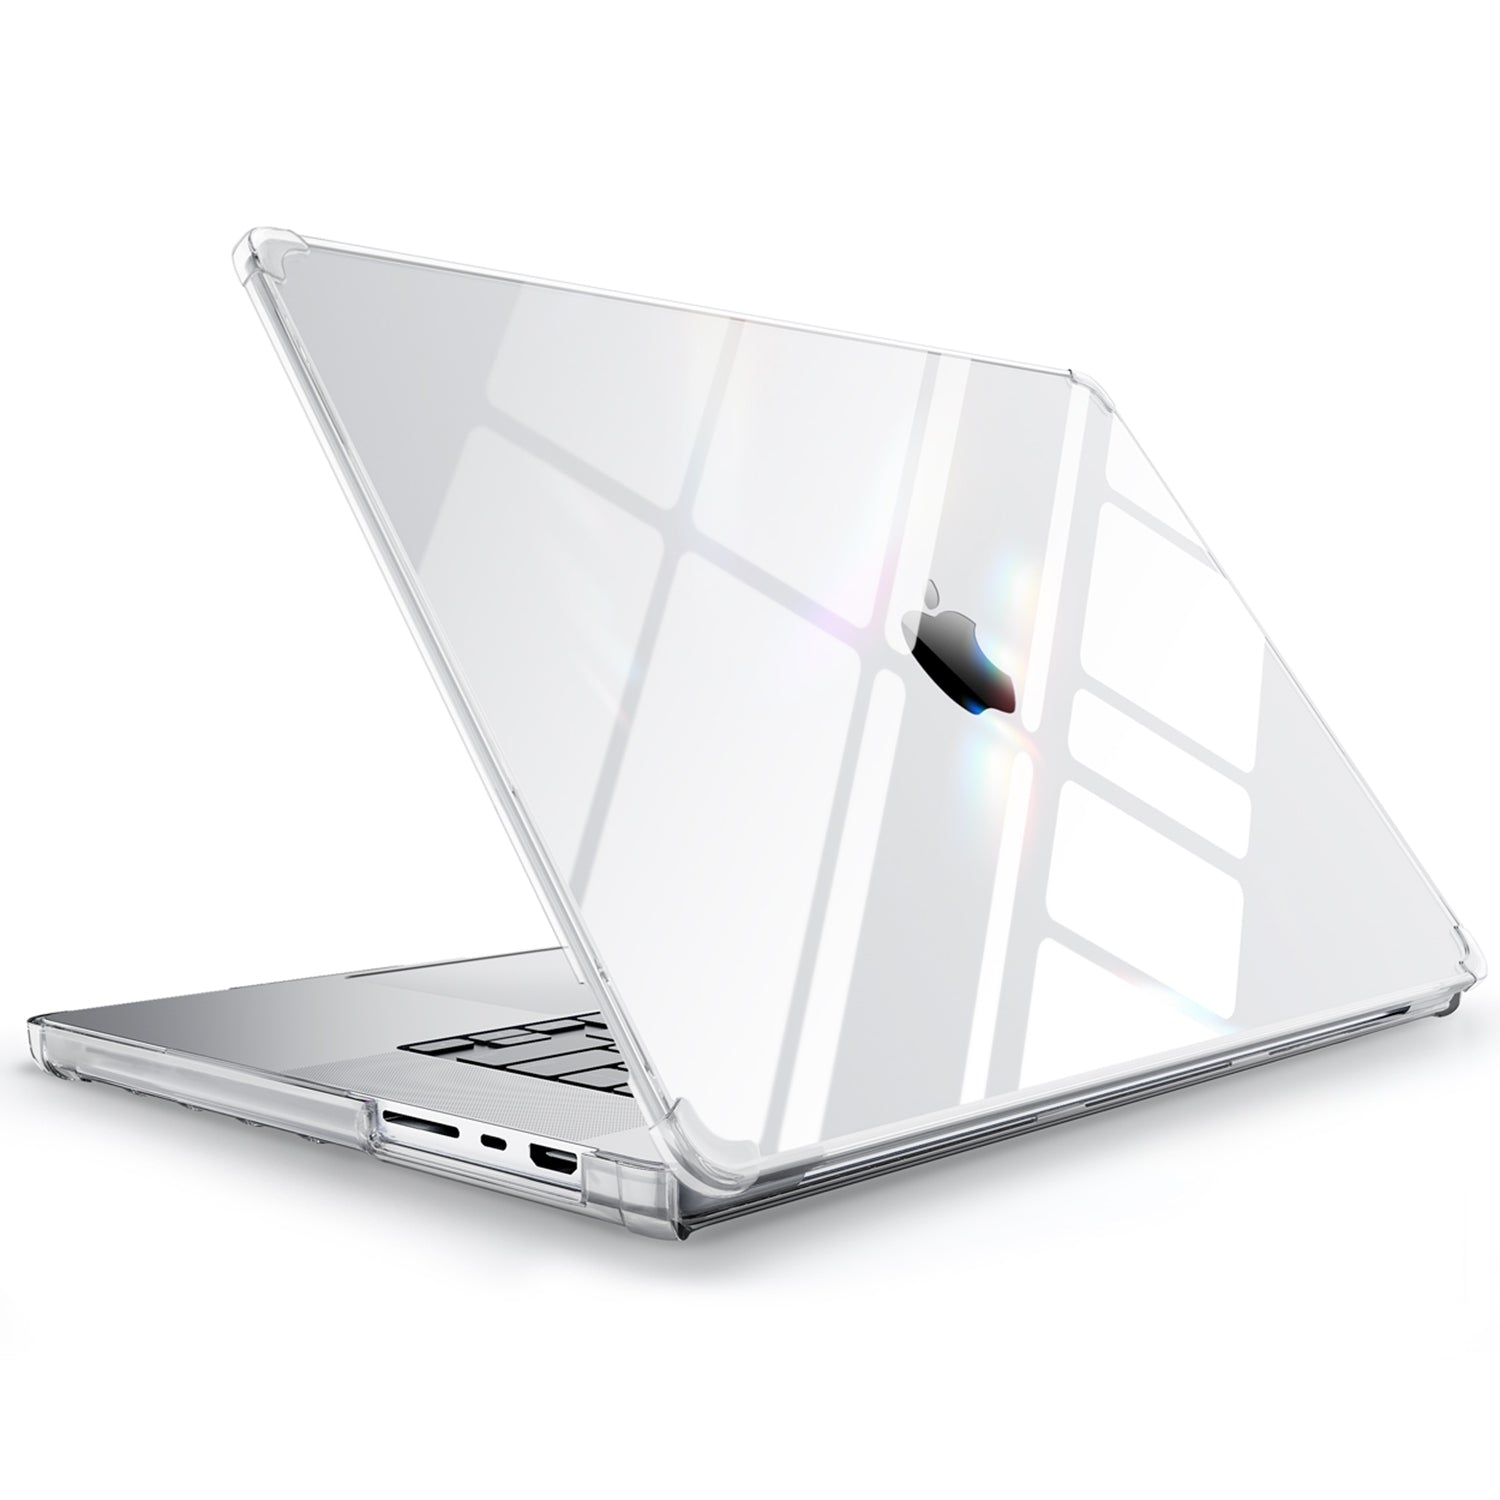 Supcase Unicorn Beetle Clear Series Case Slim Clear Protective Cover Designed for MacBook Pro 16 Inch (2021 Release) A2485 M1 Pro / M1 Max Default Supcase 